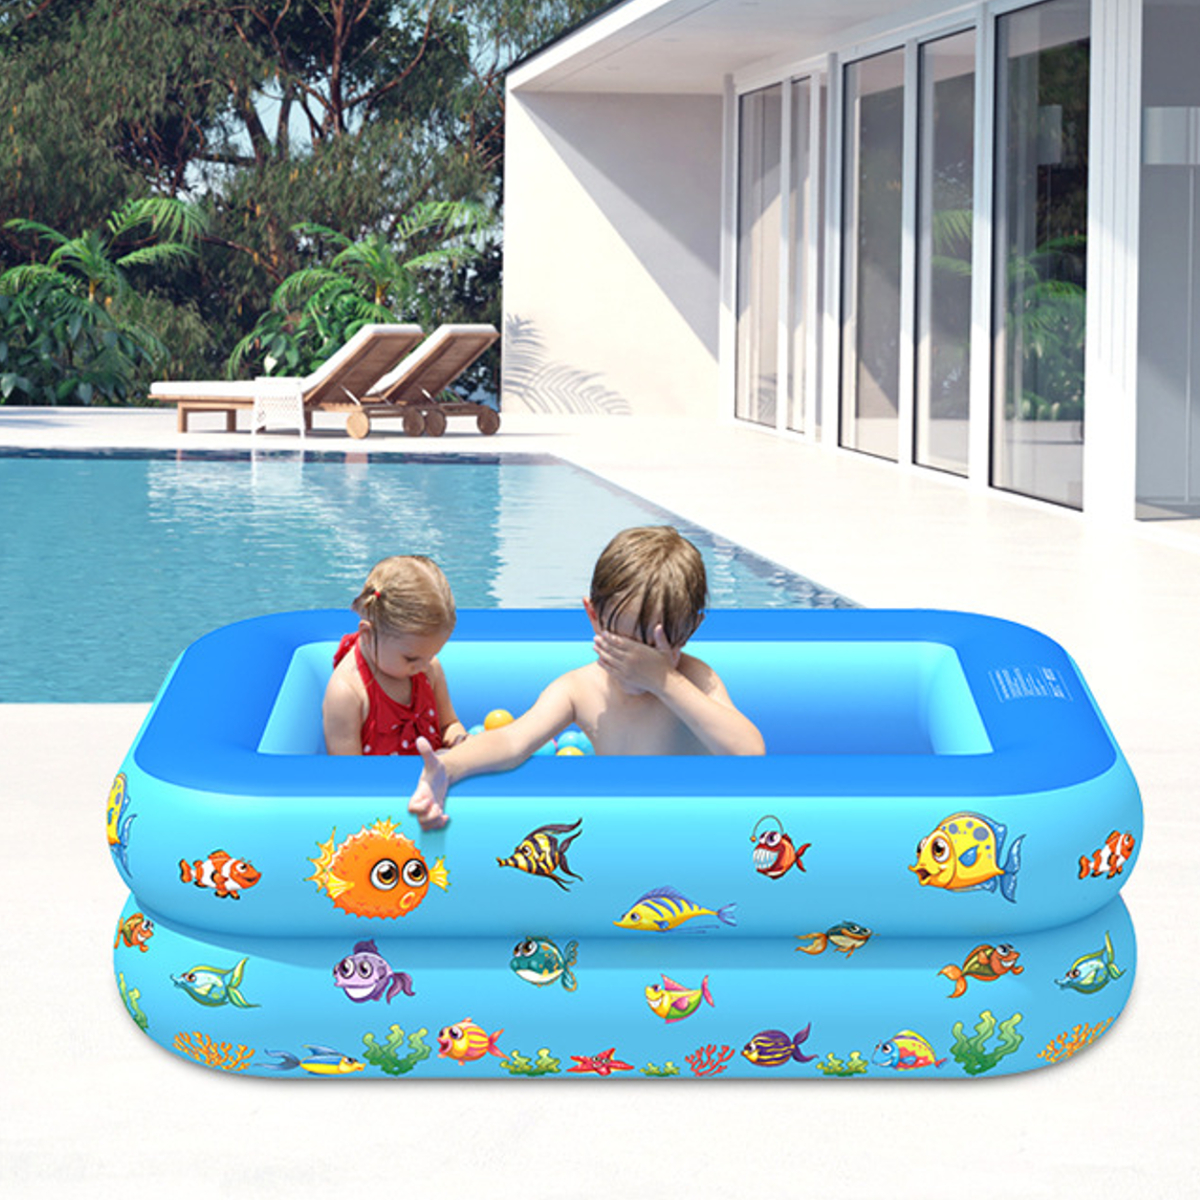 Inflatable-Swimming-Pool-Garden-Outdoor-PVC-Paddling-Pools-Kid-Game-Pool-1707398-10